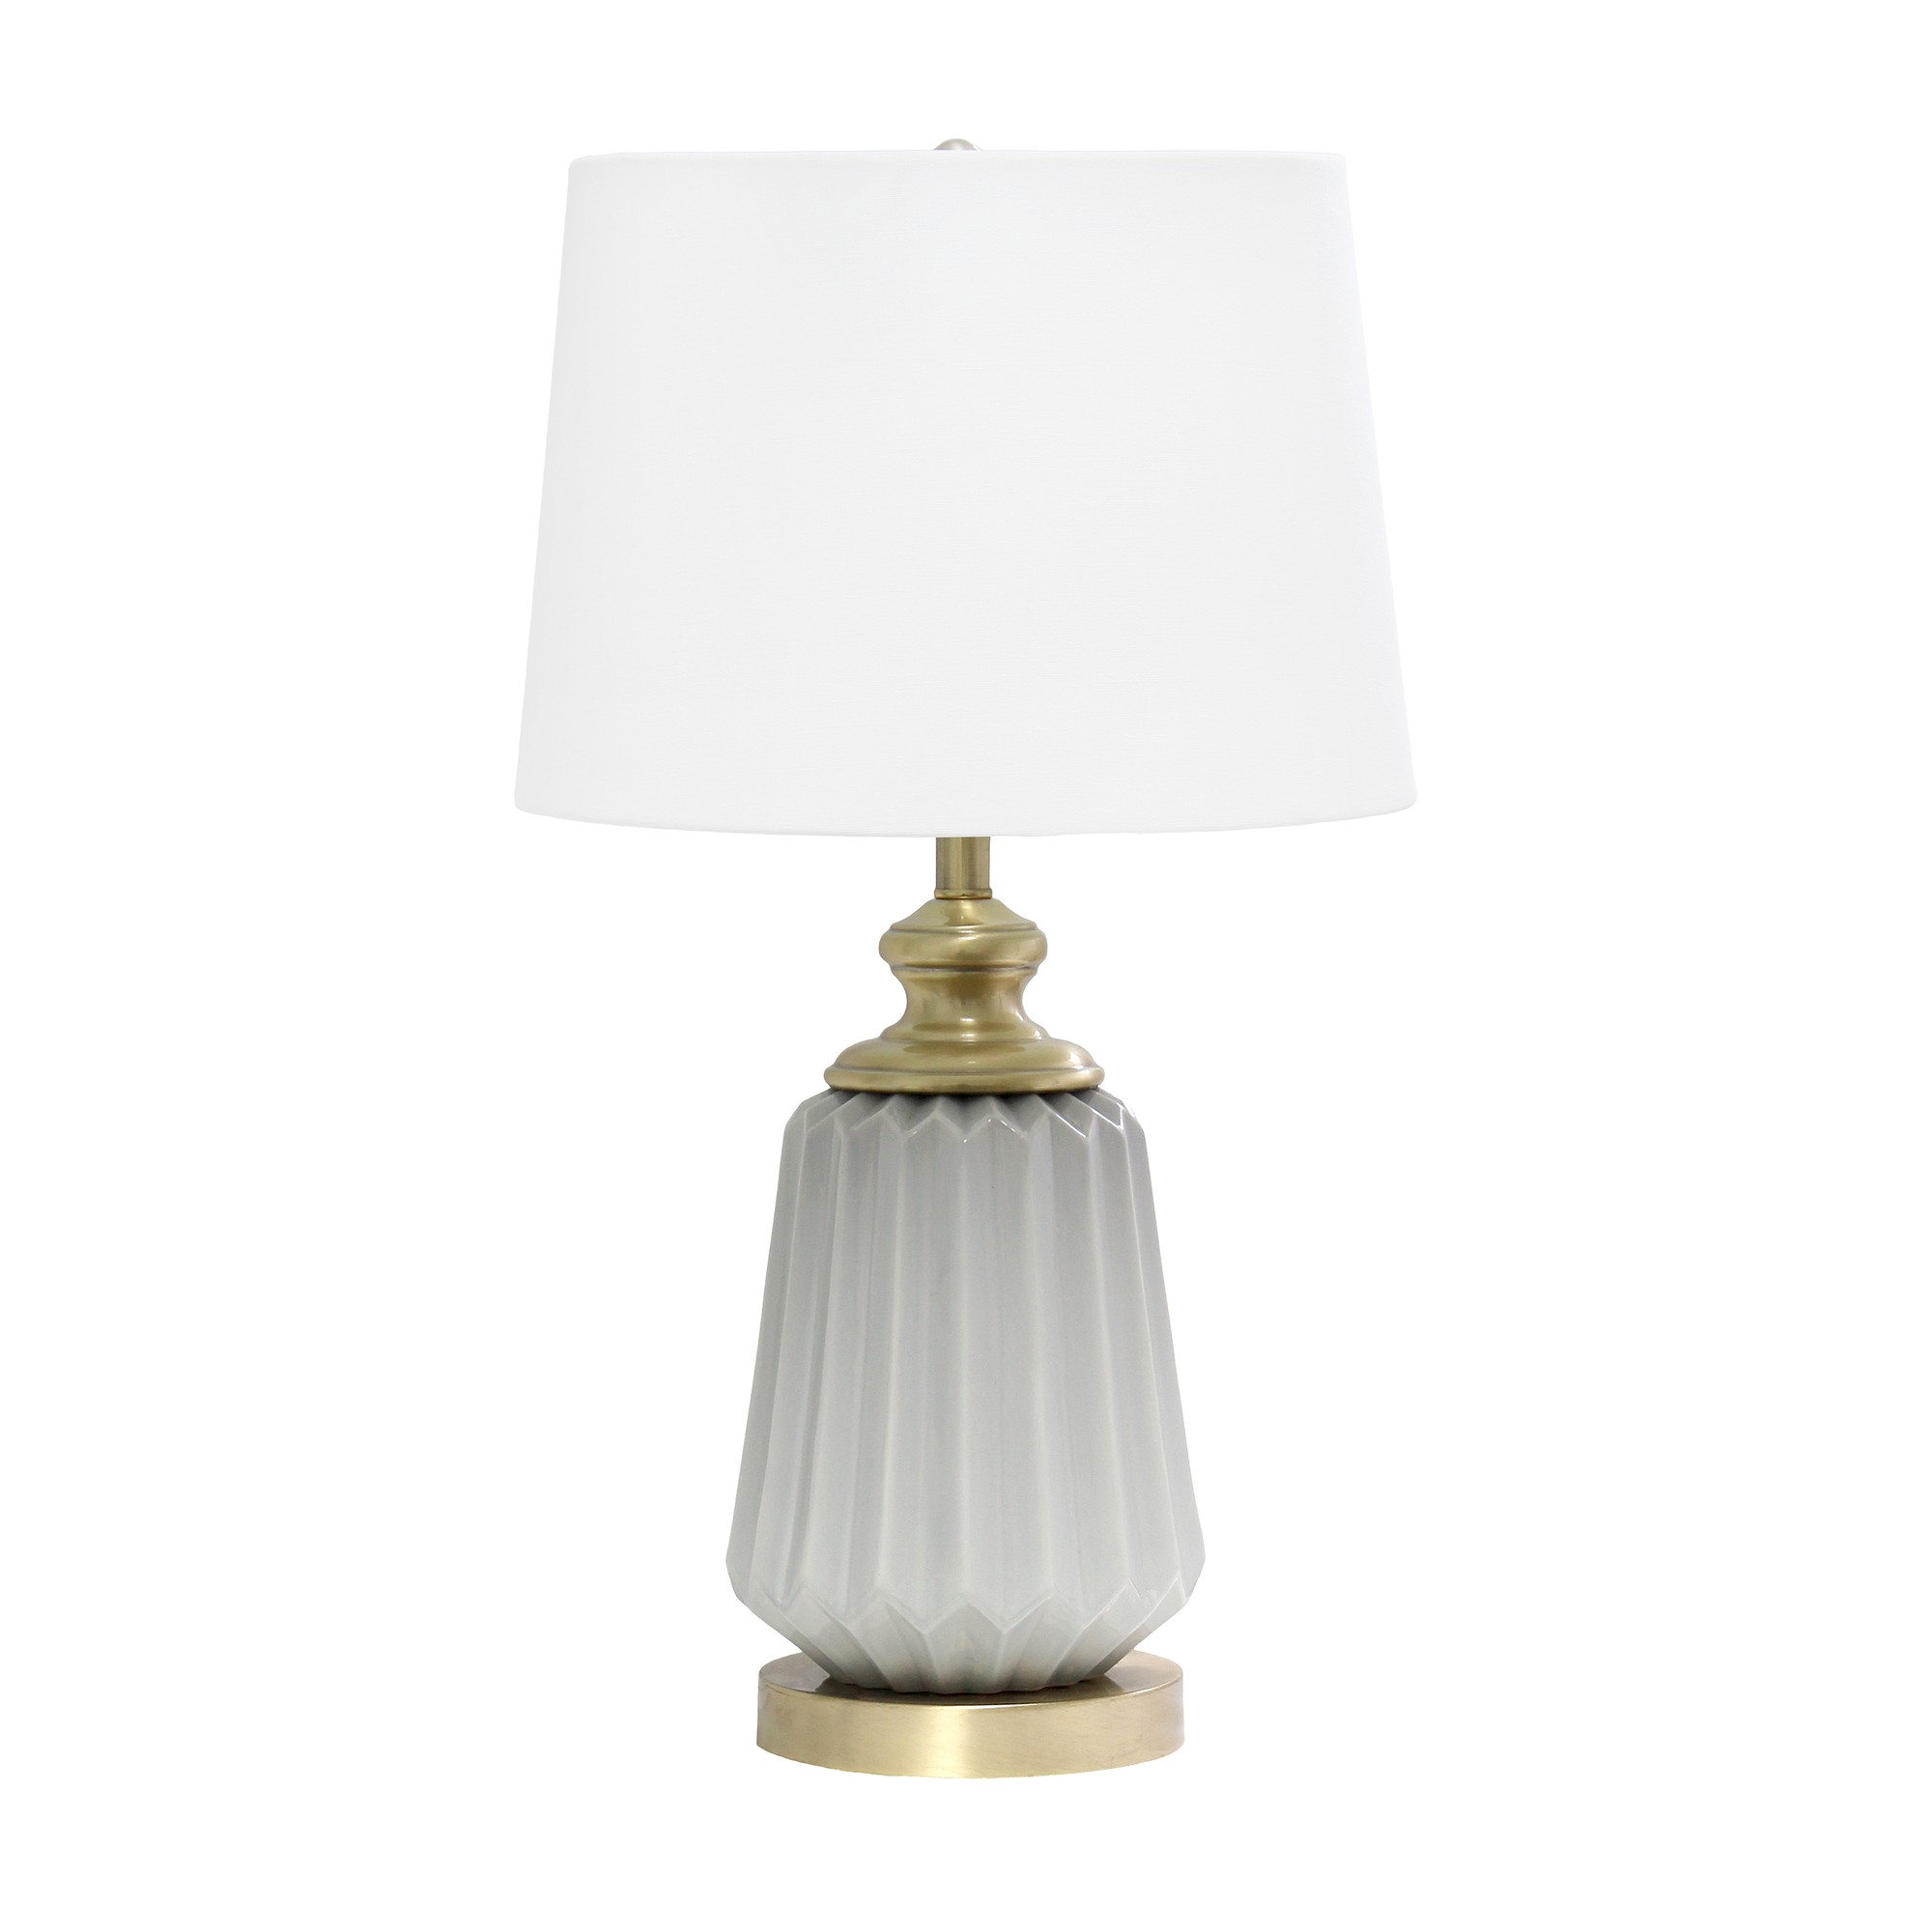 Lalia Home 25" Classic Fluted Ceramic and Metal Table Lamp with White Fabric Shade, Gray